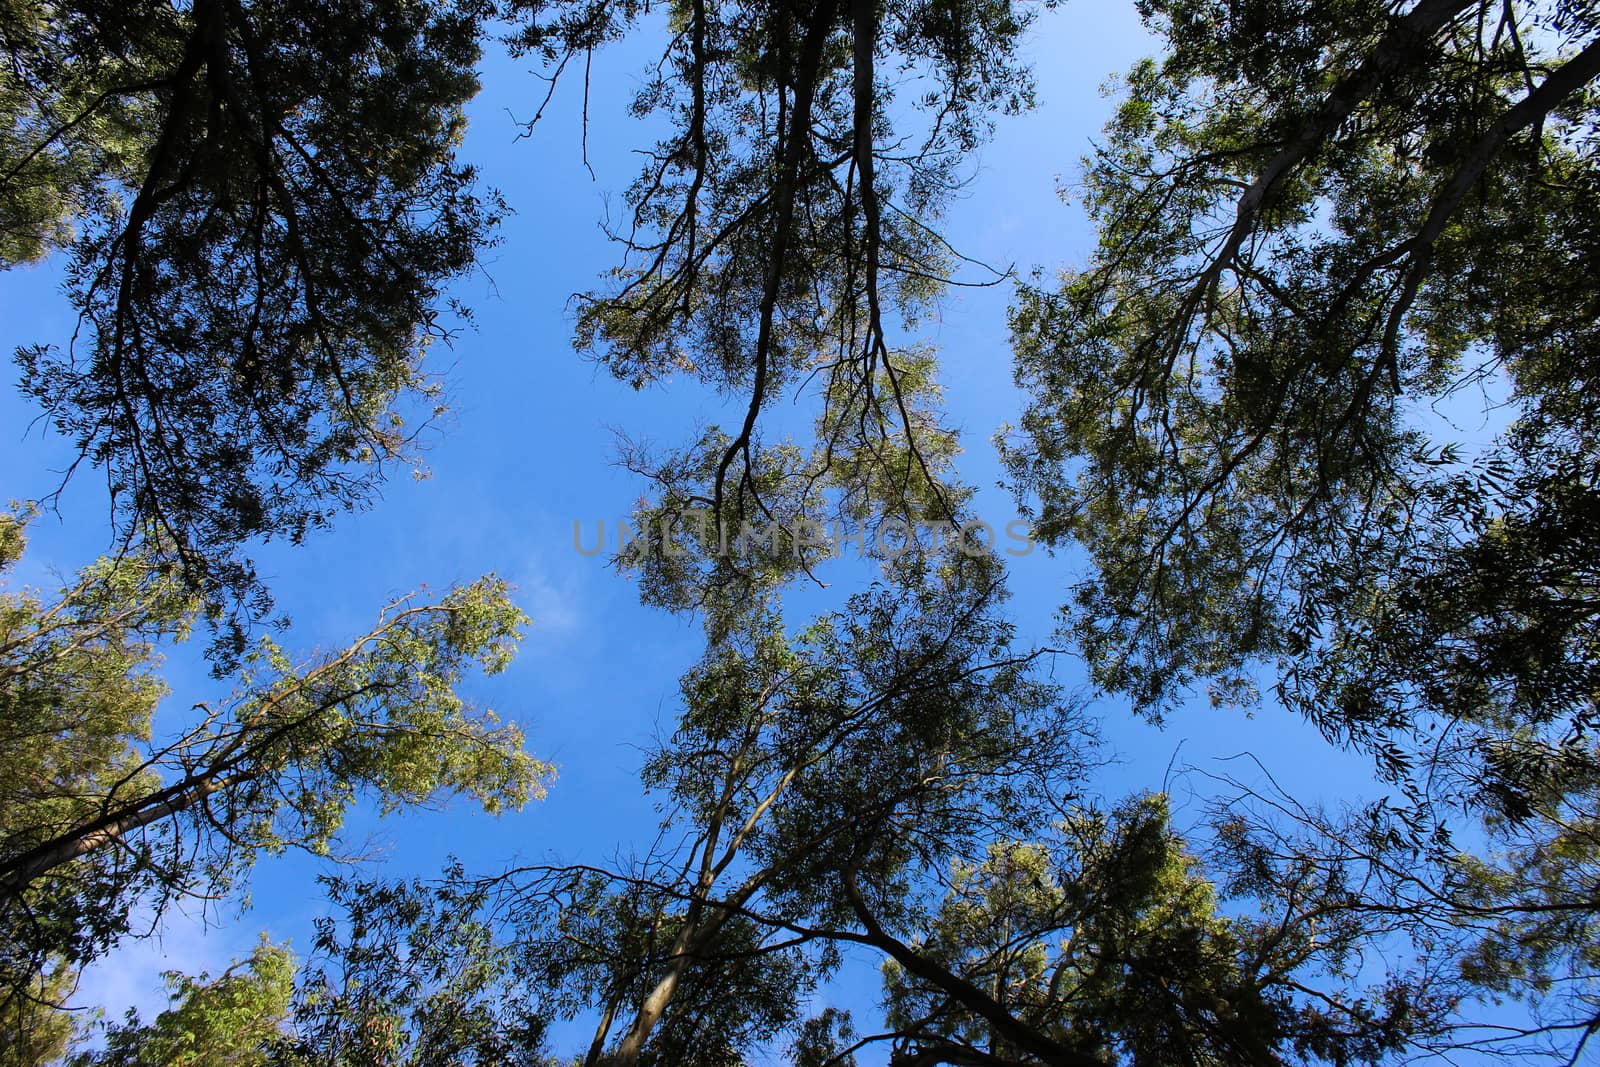 Forest, trees, branches, leaves, and blue sky background. Beja, Portugal.